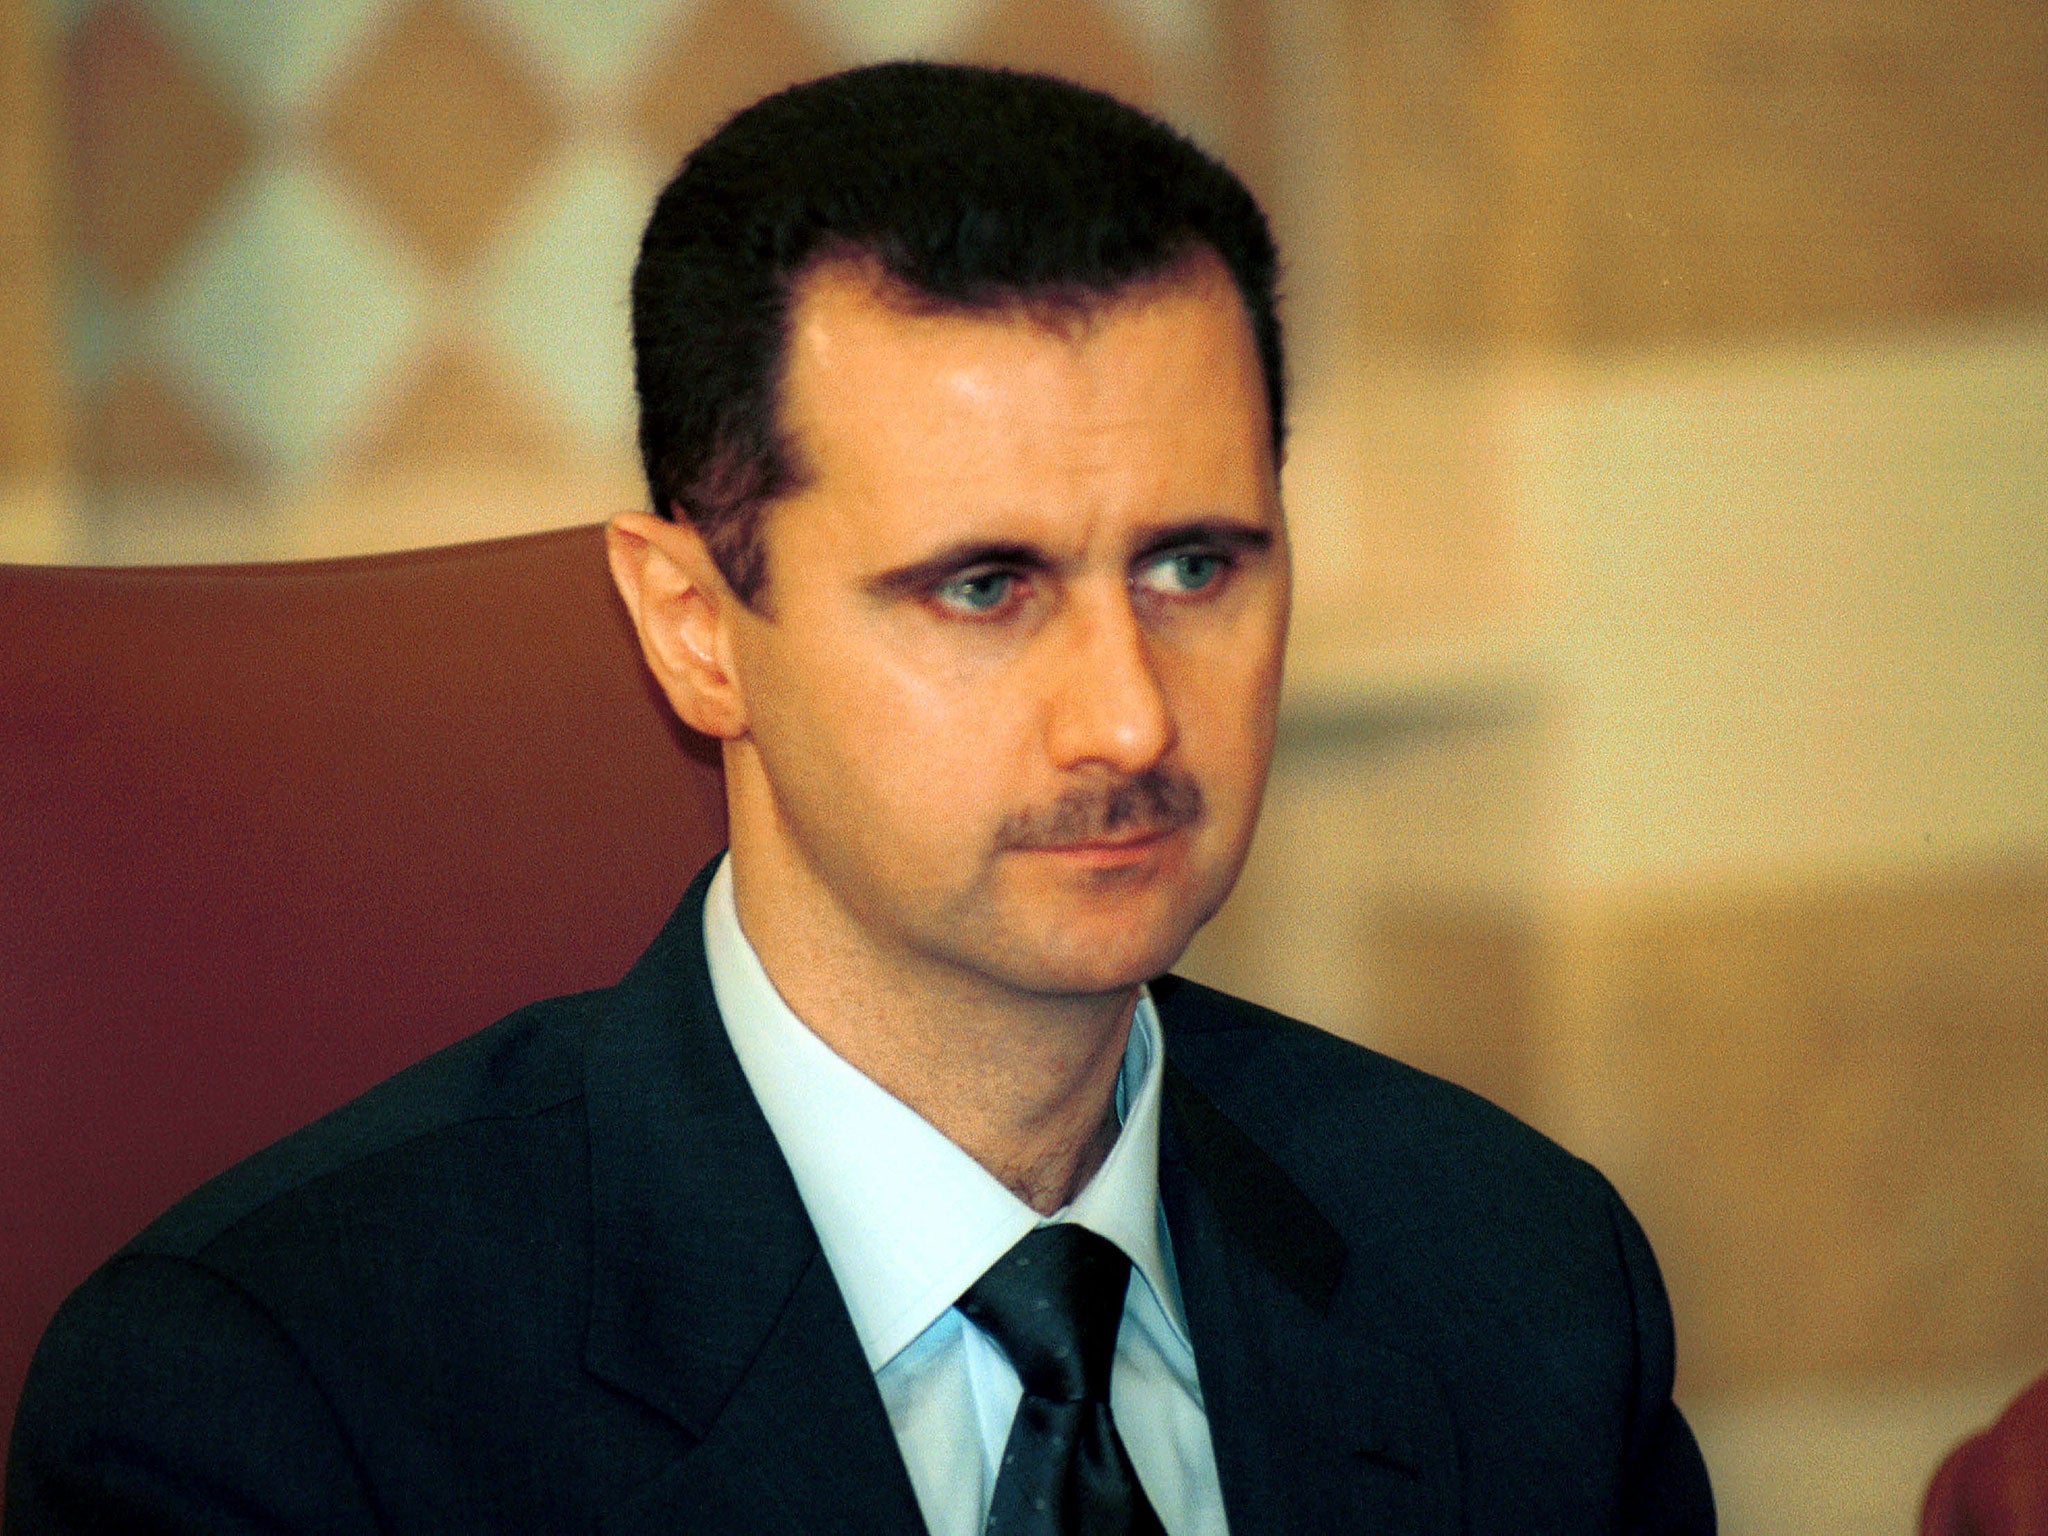 A secret plan to wage war on Syria’s President Bashar Assad was drawn up by a leading British general, according to a report